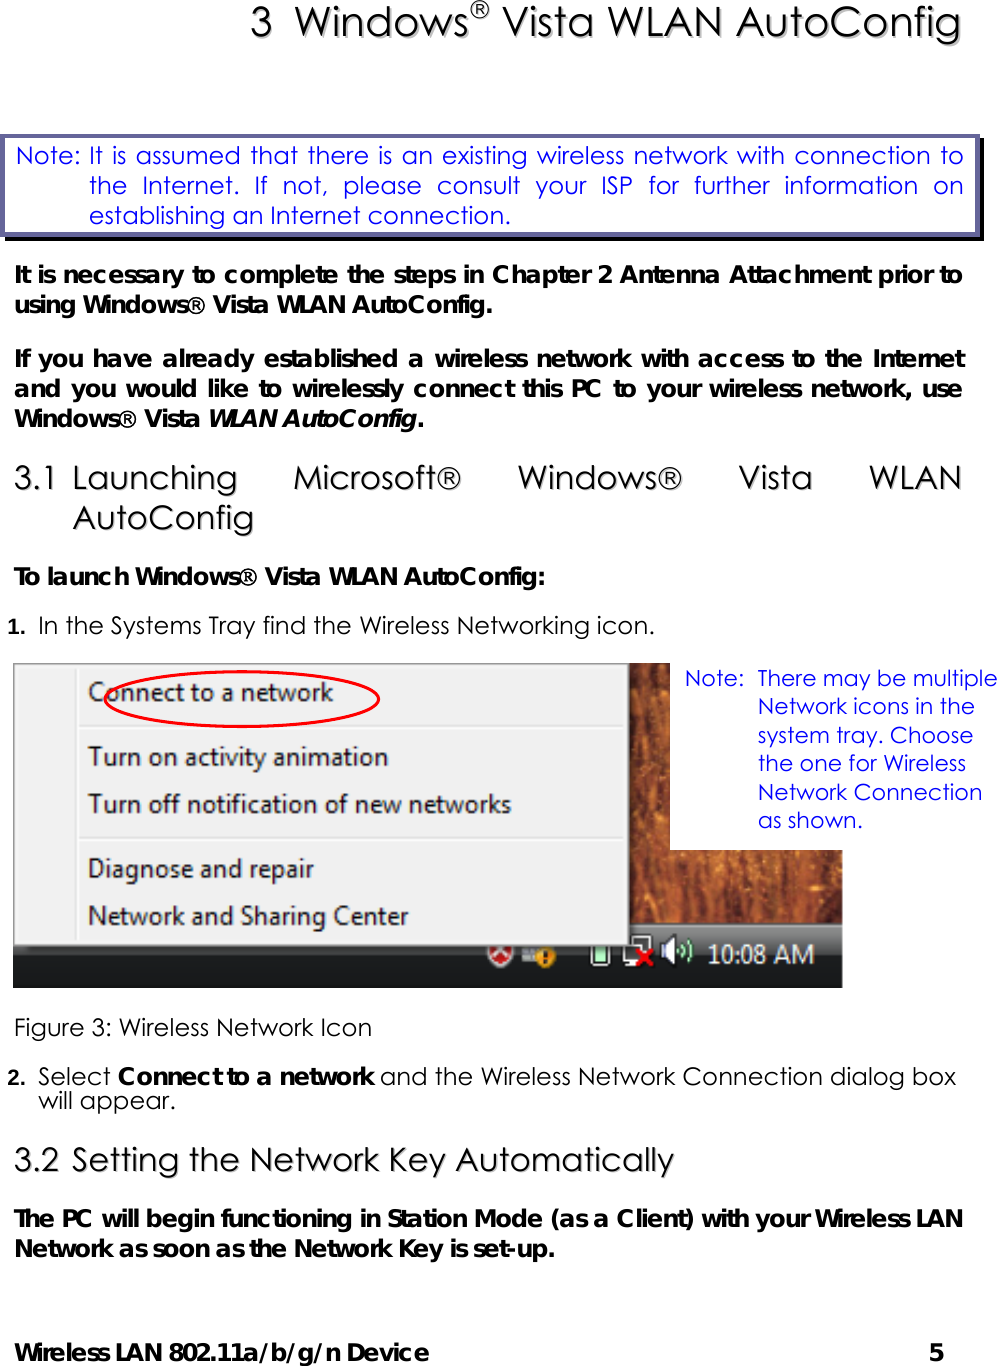 Wireless LAN 802.11a/b/g/n Device                                         5 33  WWiinnddoowwss  VViissttaa  WWLLAANN  AAuuttooCCoonnffiigg  It is necessary to complete the steps in Chapter 2 Antenna Attachment prior to using Windows Vista WLAN AutoConfig. If you have already established a wireless network with access to the Internet and you would like to wirelessly connect this PC to your wireless network, use Windows Vista WLAN AutoConfig. 33..11  LLaauunncchhiinngg  MMiiccrroossoofftt  WWiinnddoowwss  VViissttaa  WWLLAANN  AAuuttooCCoonnffiigg    To launch Windows Vista WLAN AutoConfig: 1.  In the Systems Tray find the Wireless Networking icon.  Figure 3: Wireless Network Icon 2.  Select Connect to a network and the Wireless Network Connection dialog box will appear. 33..22  SSeettttiinngg  tthhee  NNeettwwoorrkk  KKeeyy  AAuuttoommaattiiccaallllyy  The PC will begin functioning in Station Mode (as a Client) with your Wireless LAN Network as soon as the Network Key is set-up. Note: It is assumed that there is an existing wireless network with connection to    the Internet. If not, please consult your ISP for further information on establishing an Internet connection.  Note: There may be multiple Network icons in the system tray. Choose the one for Wireless Network Connection as shown. 